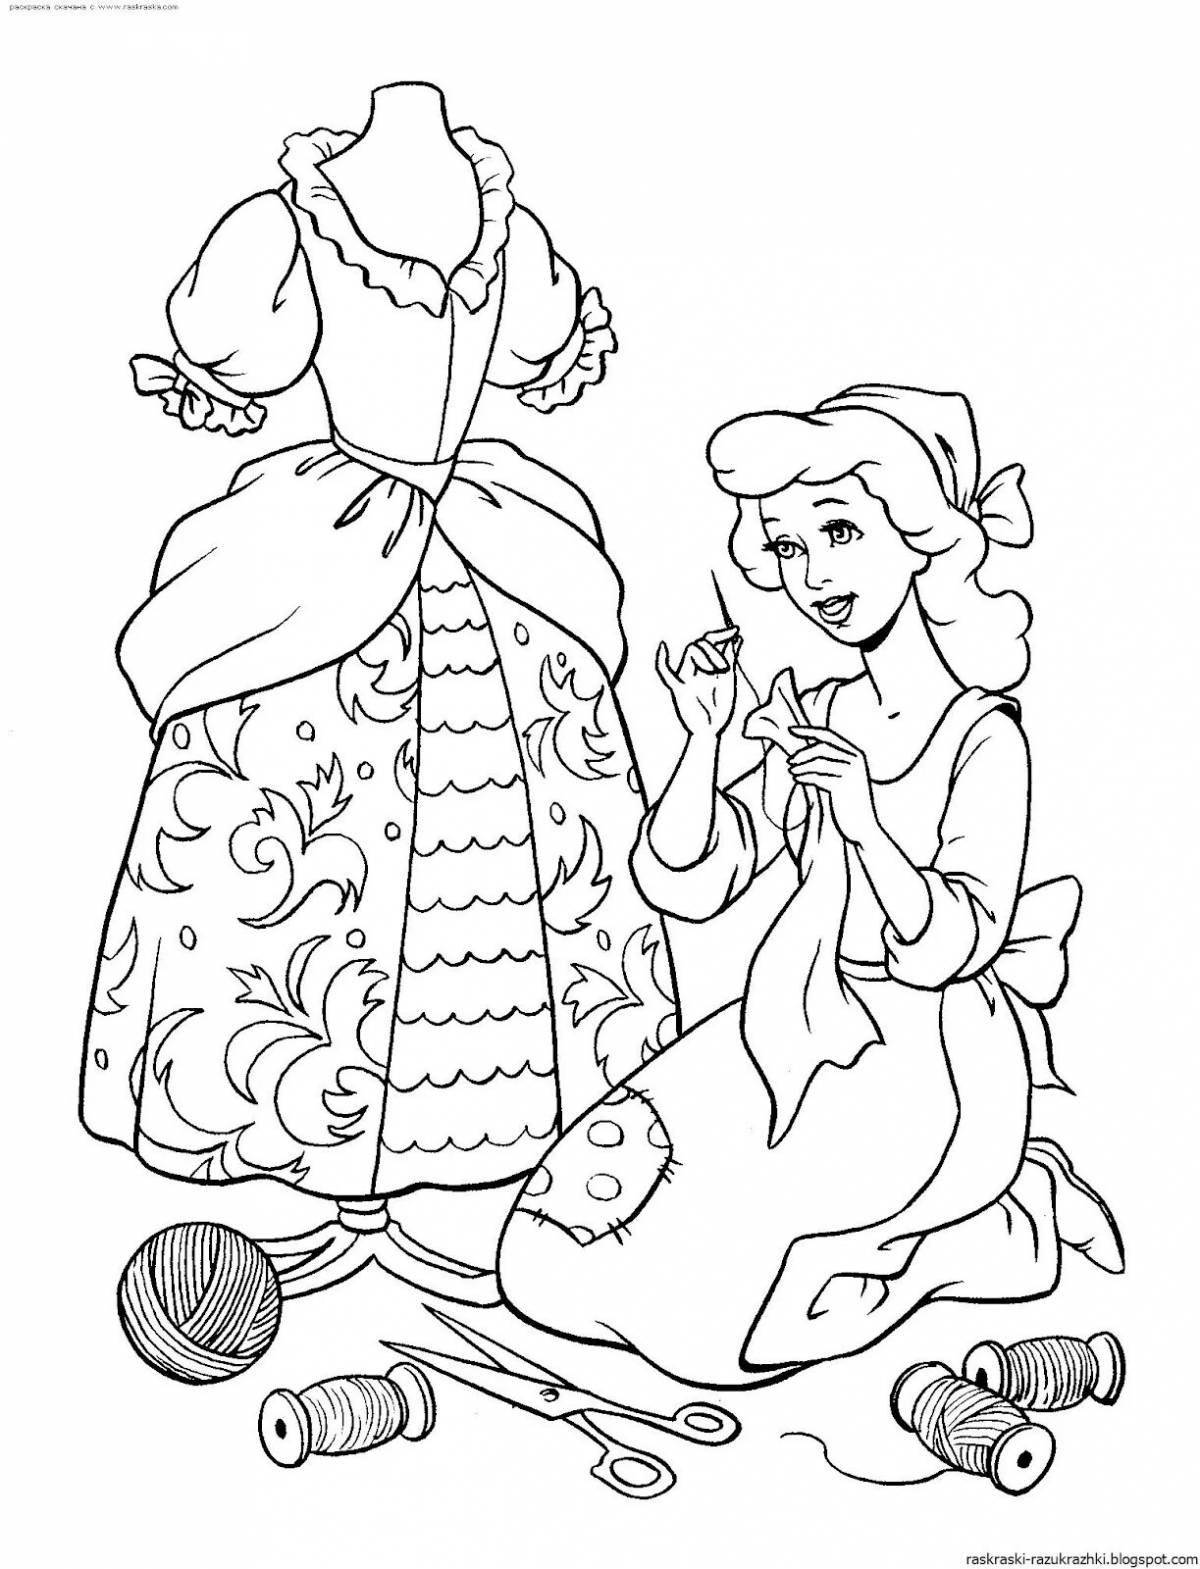 Wonderful fairy tale coloring pages for girls